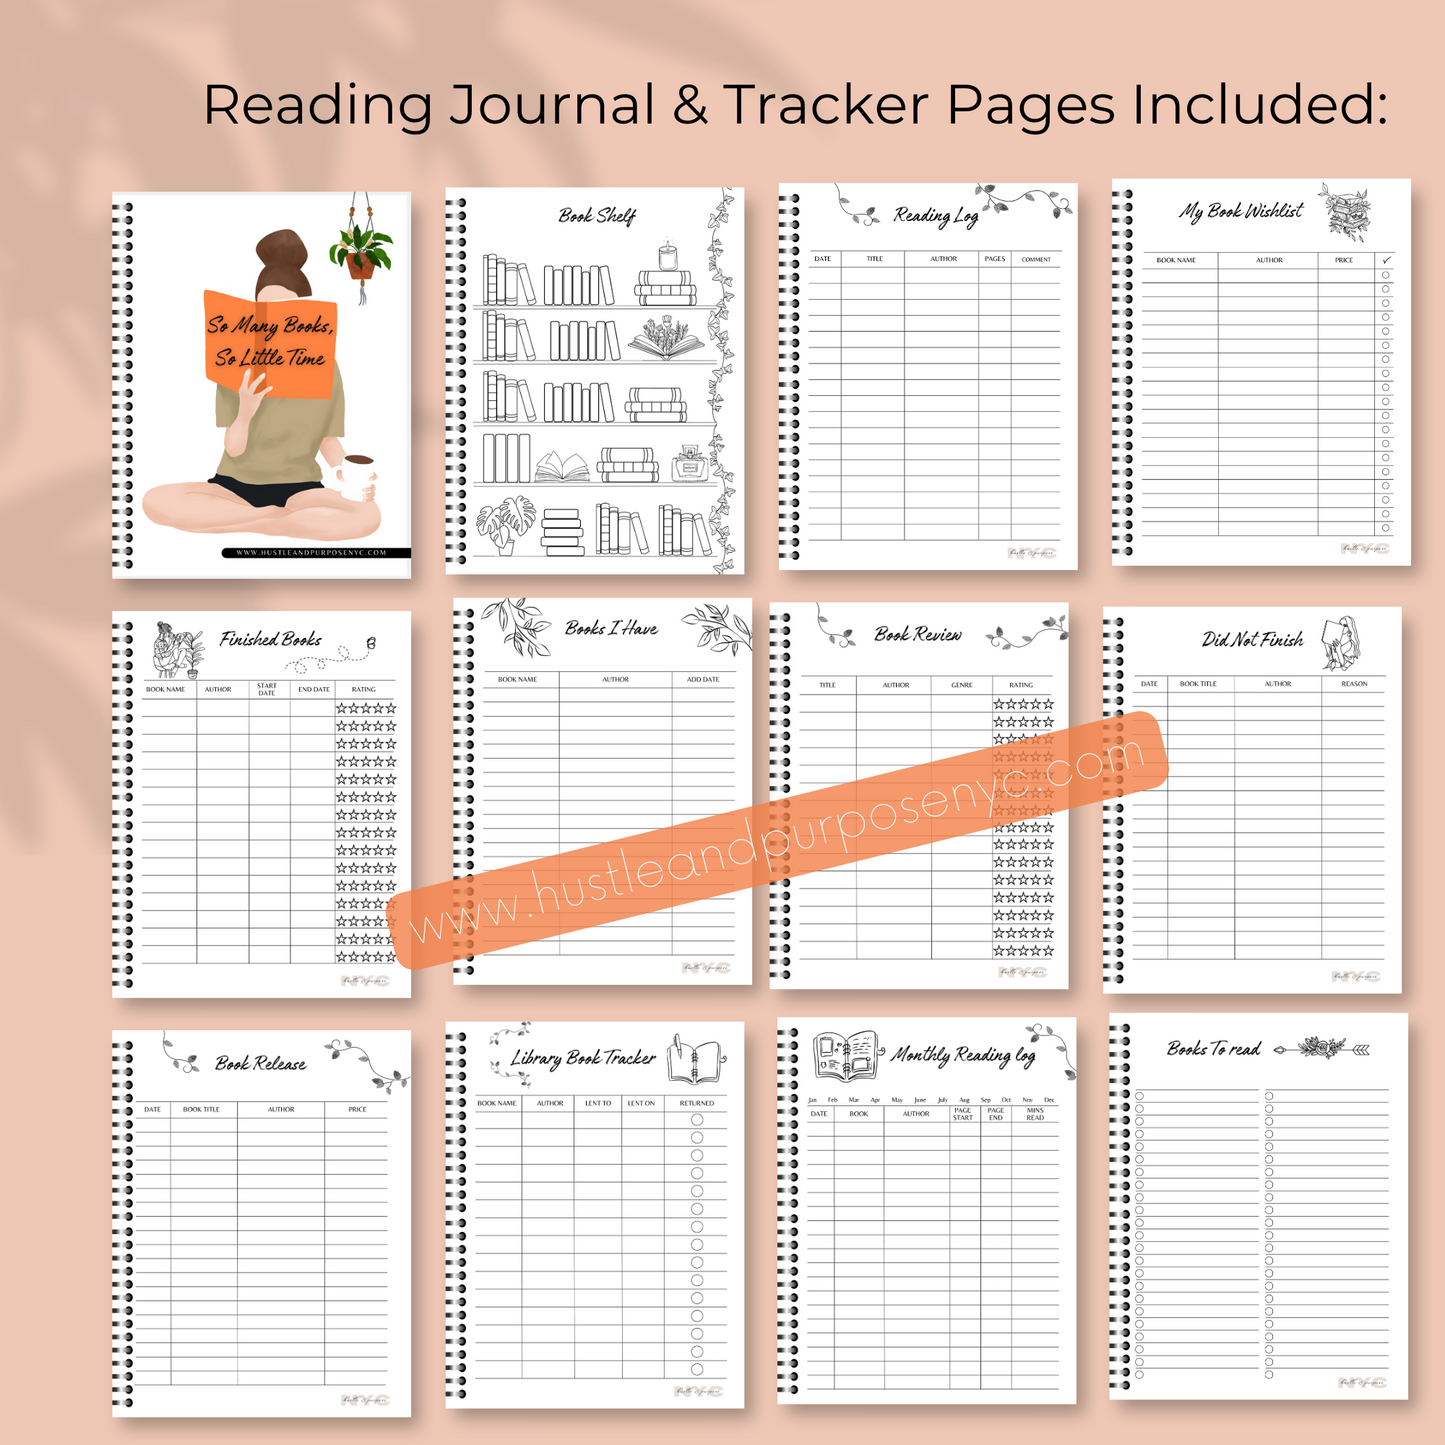 39-Page Reading Journal and Tracker Bundle - Black and White Theme